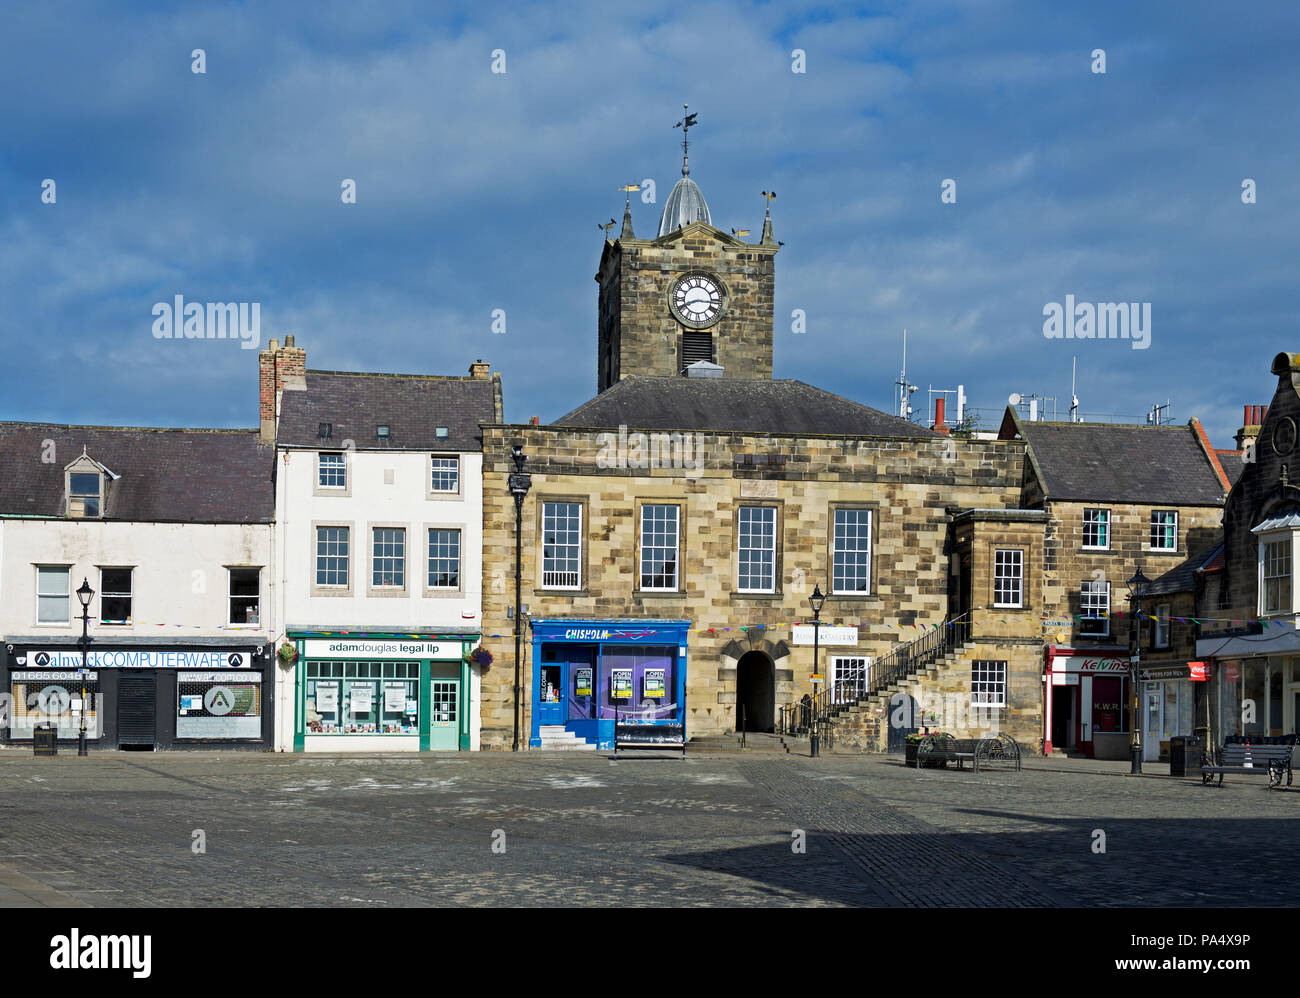 The old town hall, Market Square, Alnwick, Northumberland, England UK Stock Photo